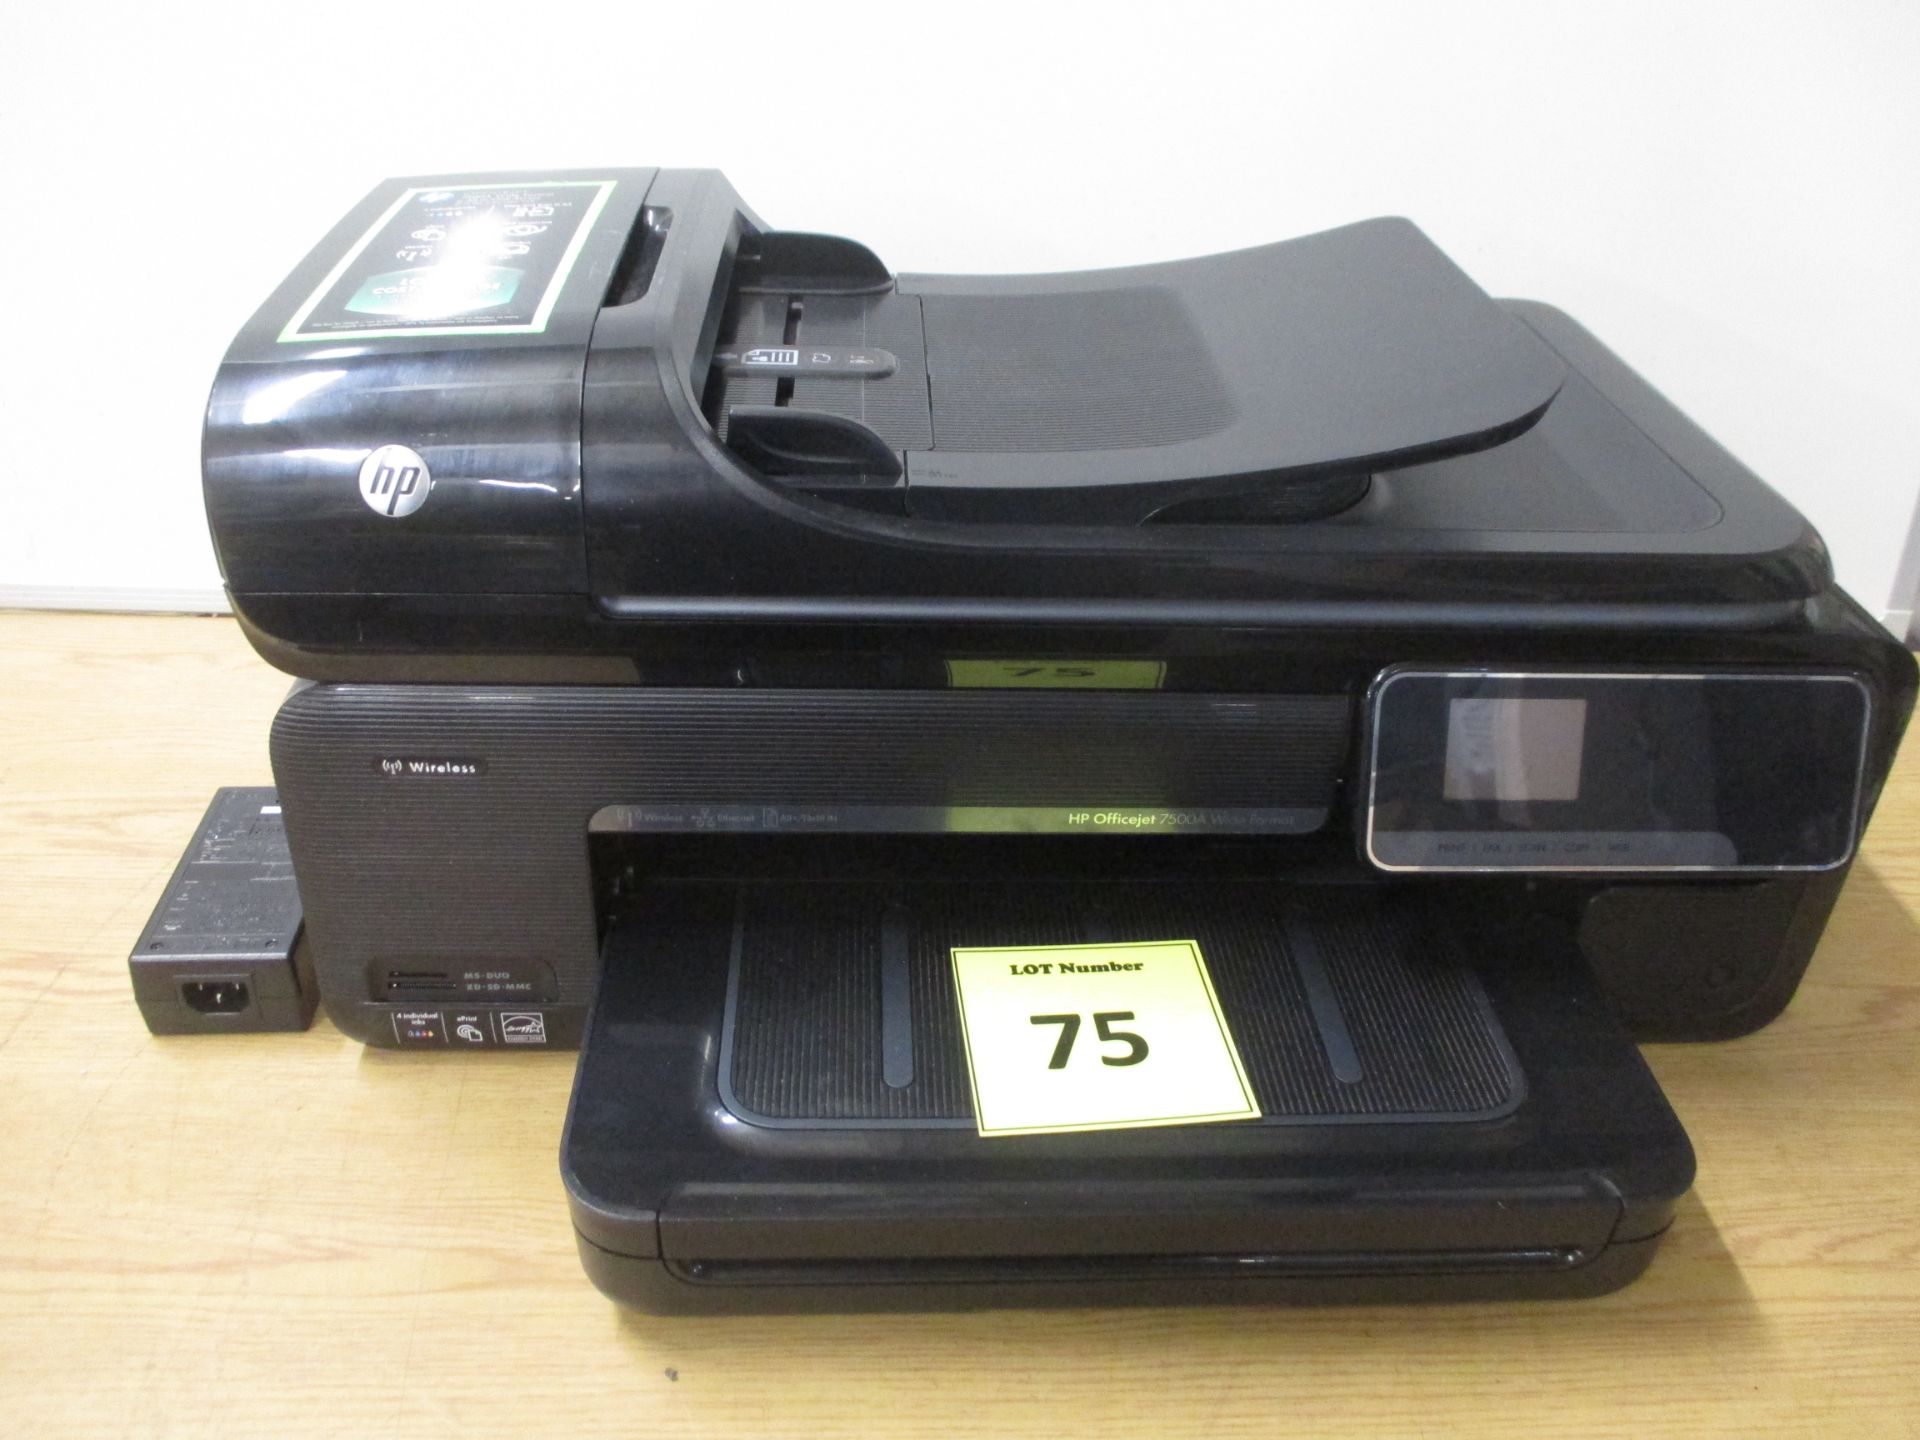 HP OFFICEJET 7500A WIDE FORMAT e-ALL IN ONE SERIES. PRINT/SCAN/COPY/FAX/WEB. WITH PSU